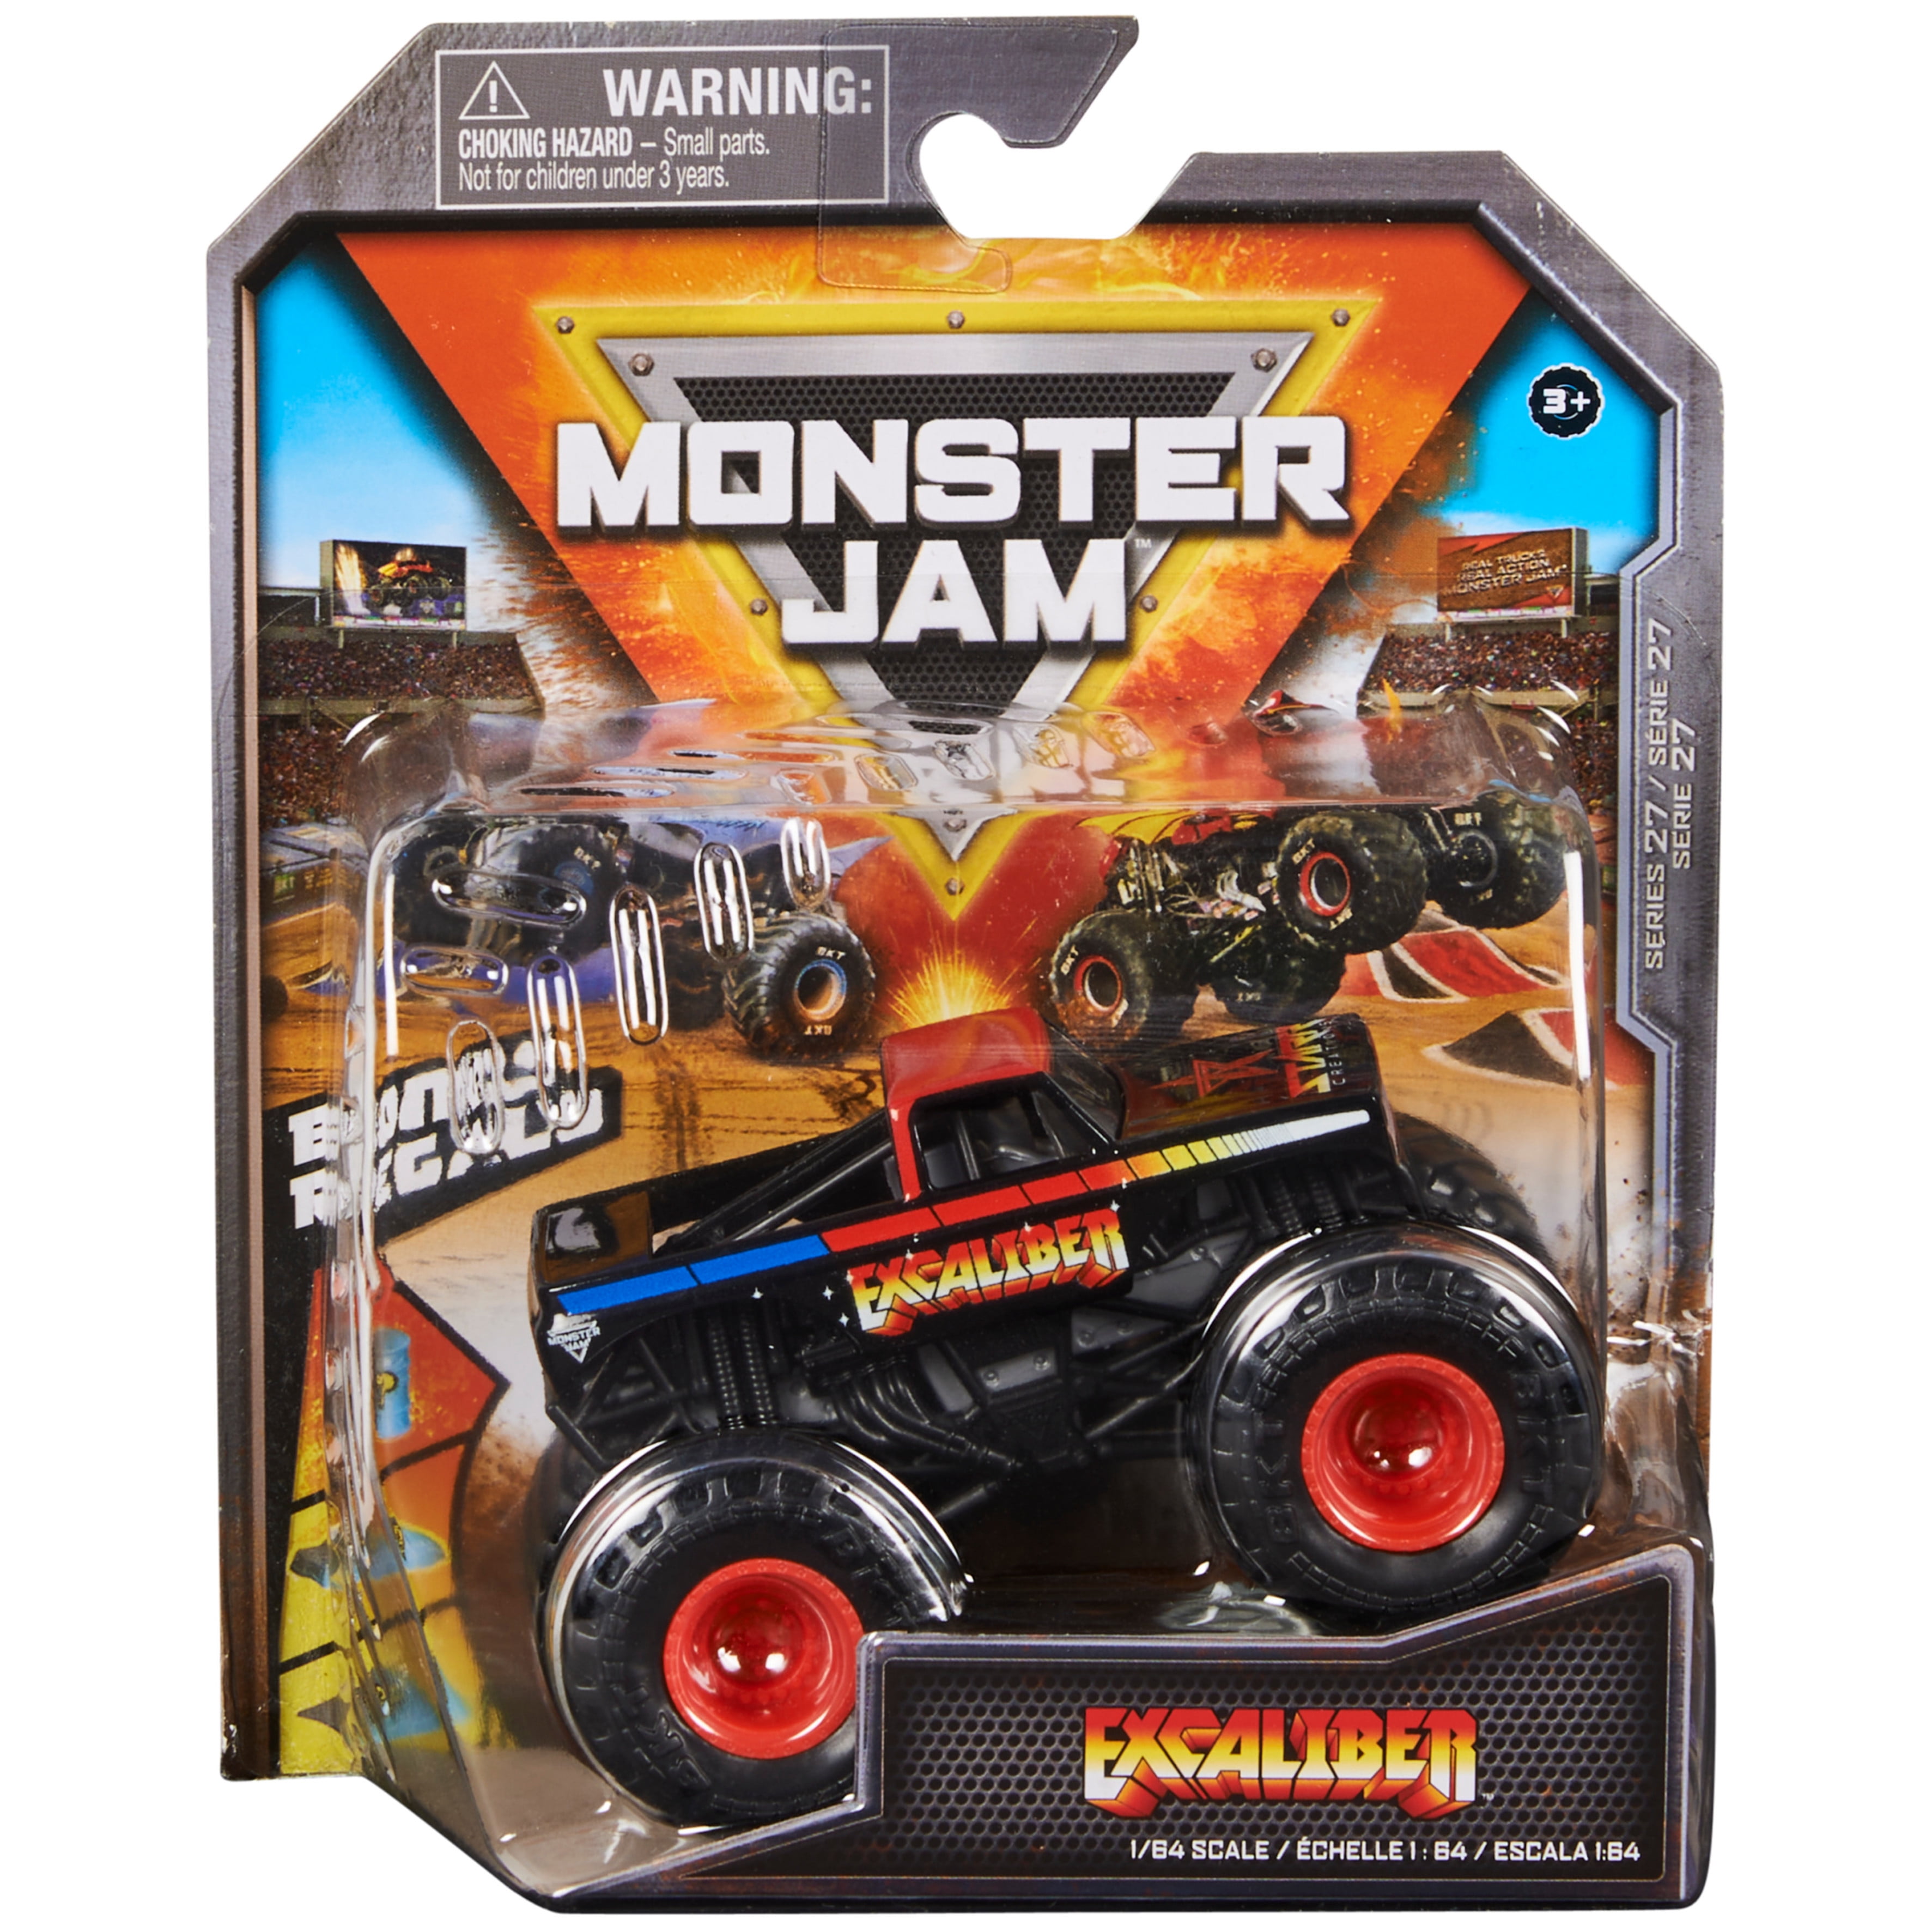 Monster Jam World Finals Big Air Challenge Playset with Monster